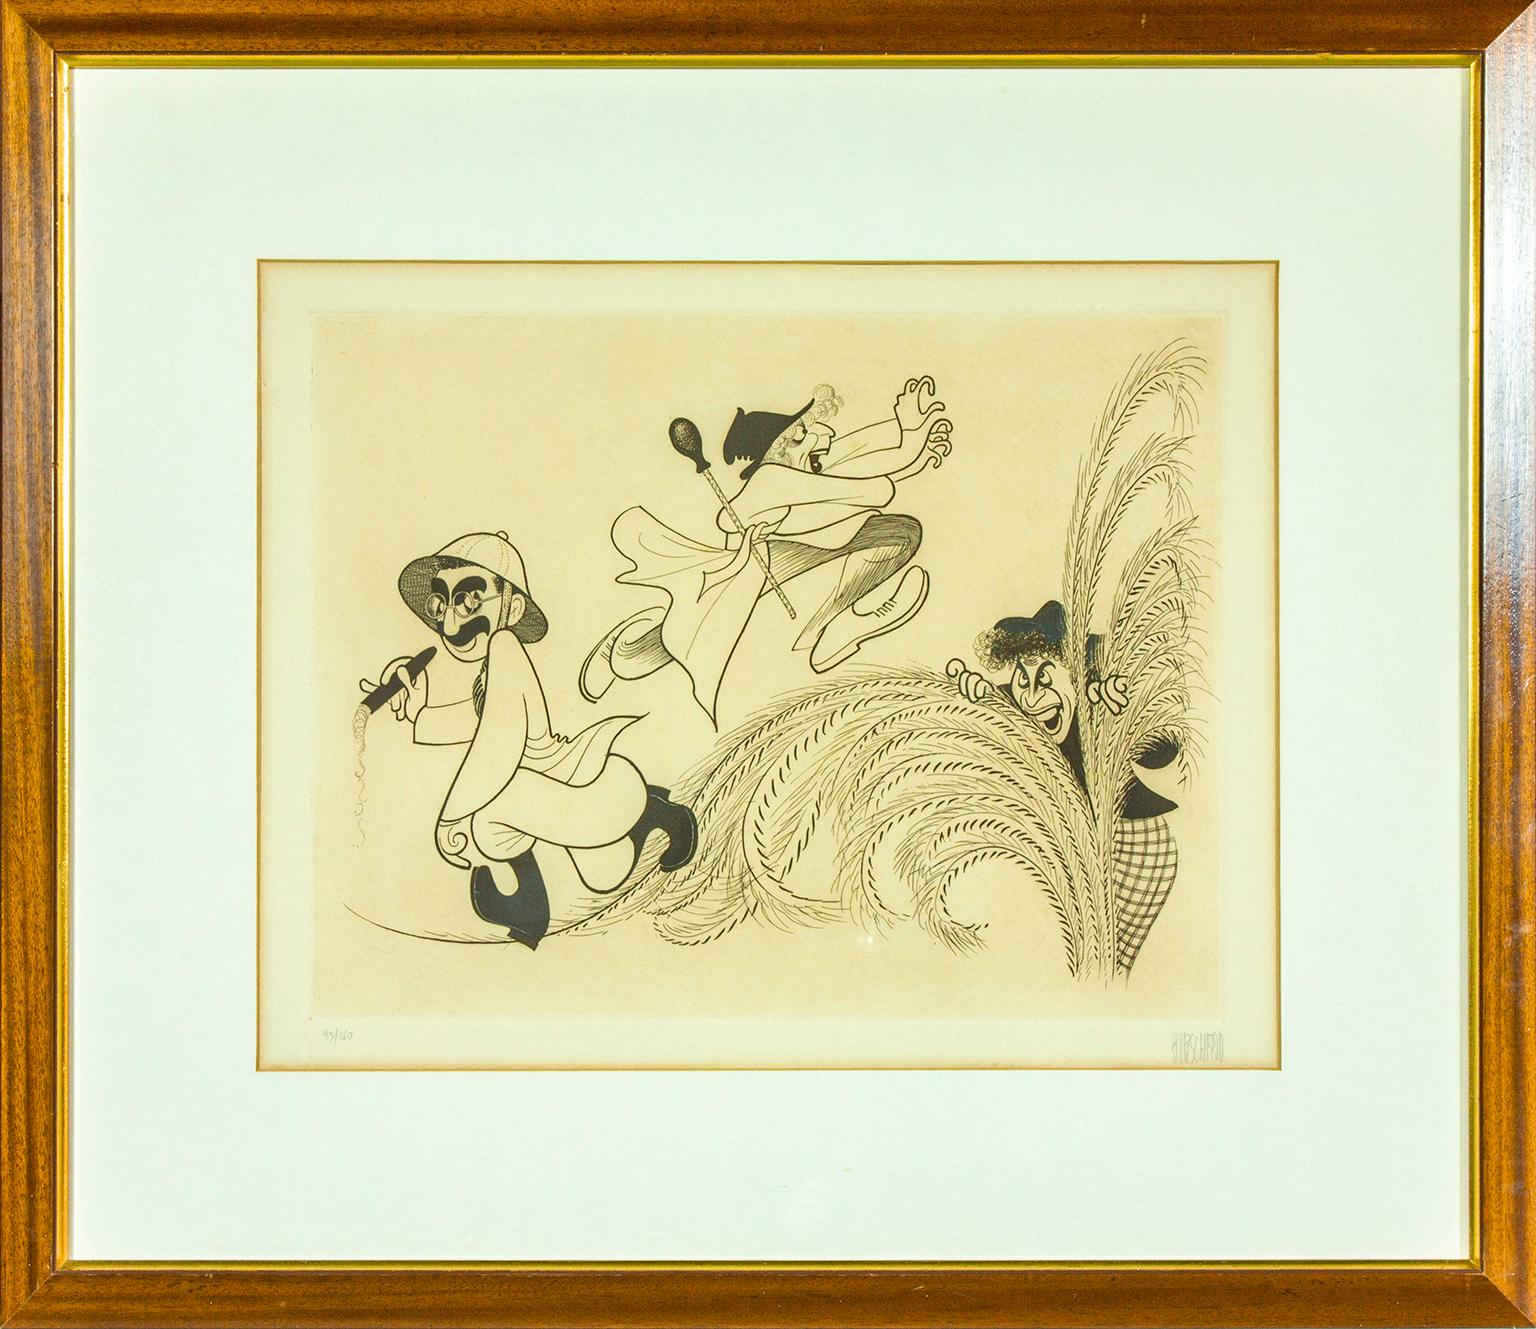 Albert Al Hirschfeld Figurative Print - "Marx Brothers" original etching by Al Hirschfeld. Hand signed and numbered.